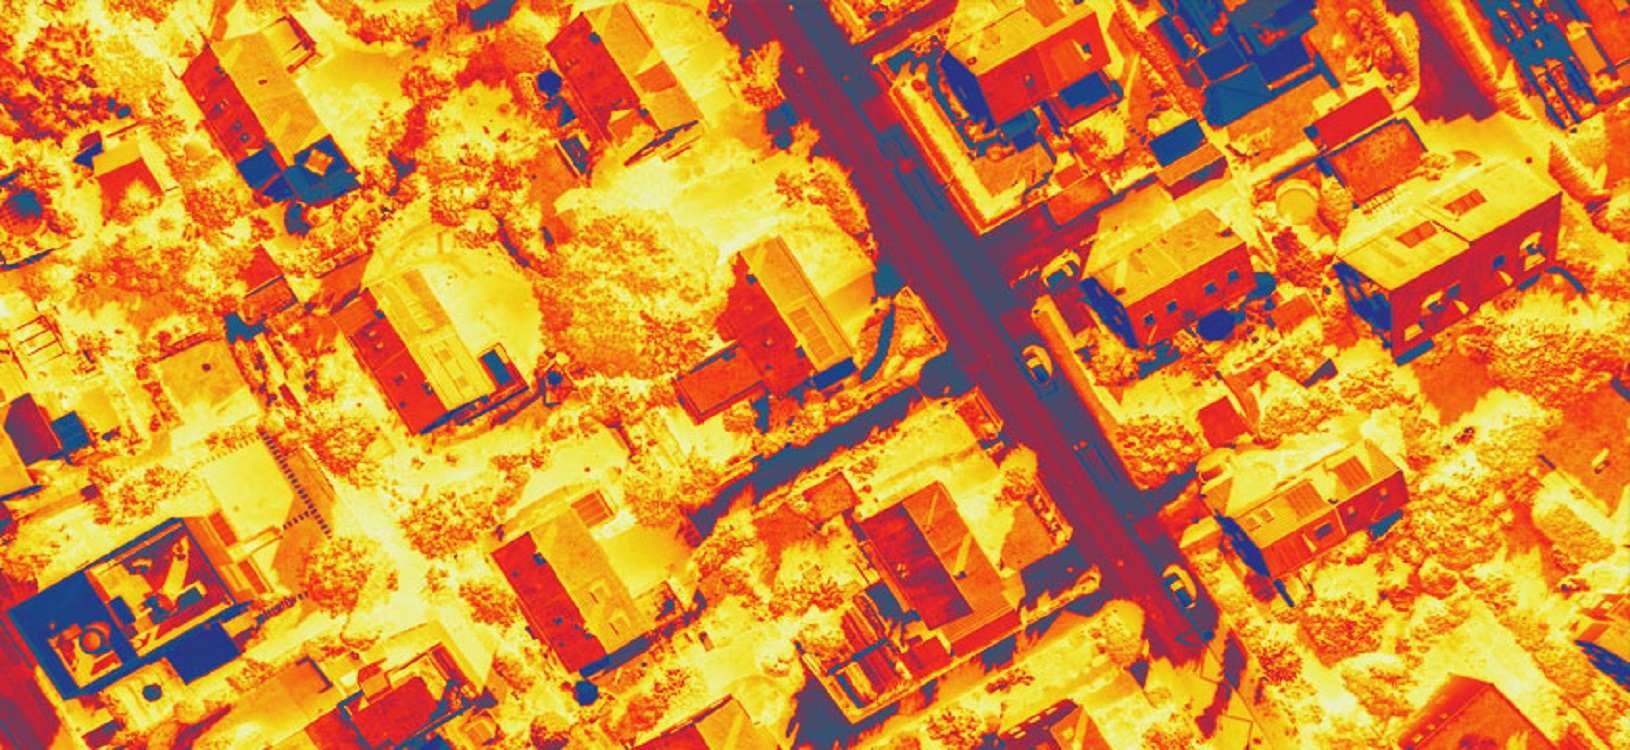 Thermal imaging technology is making our lives better